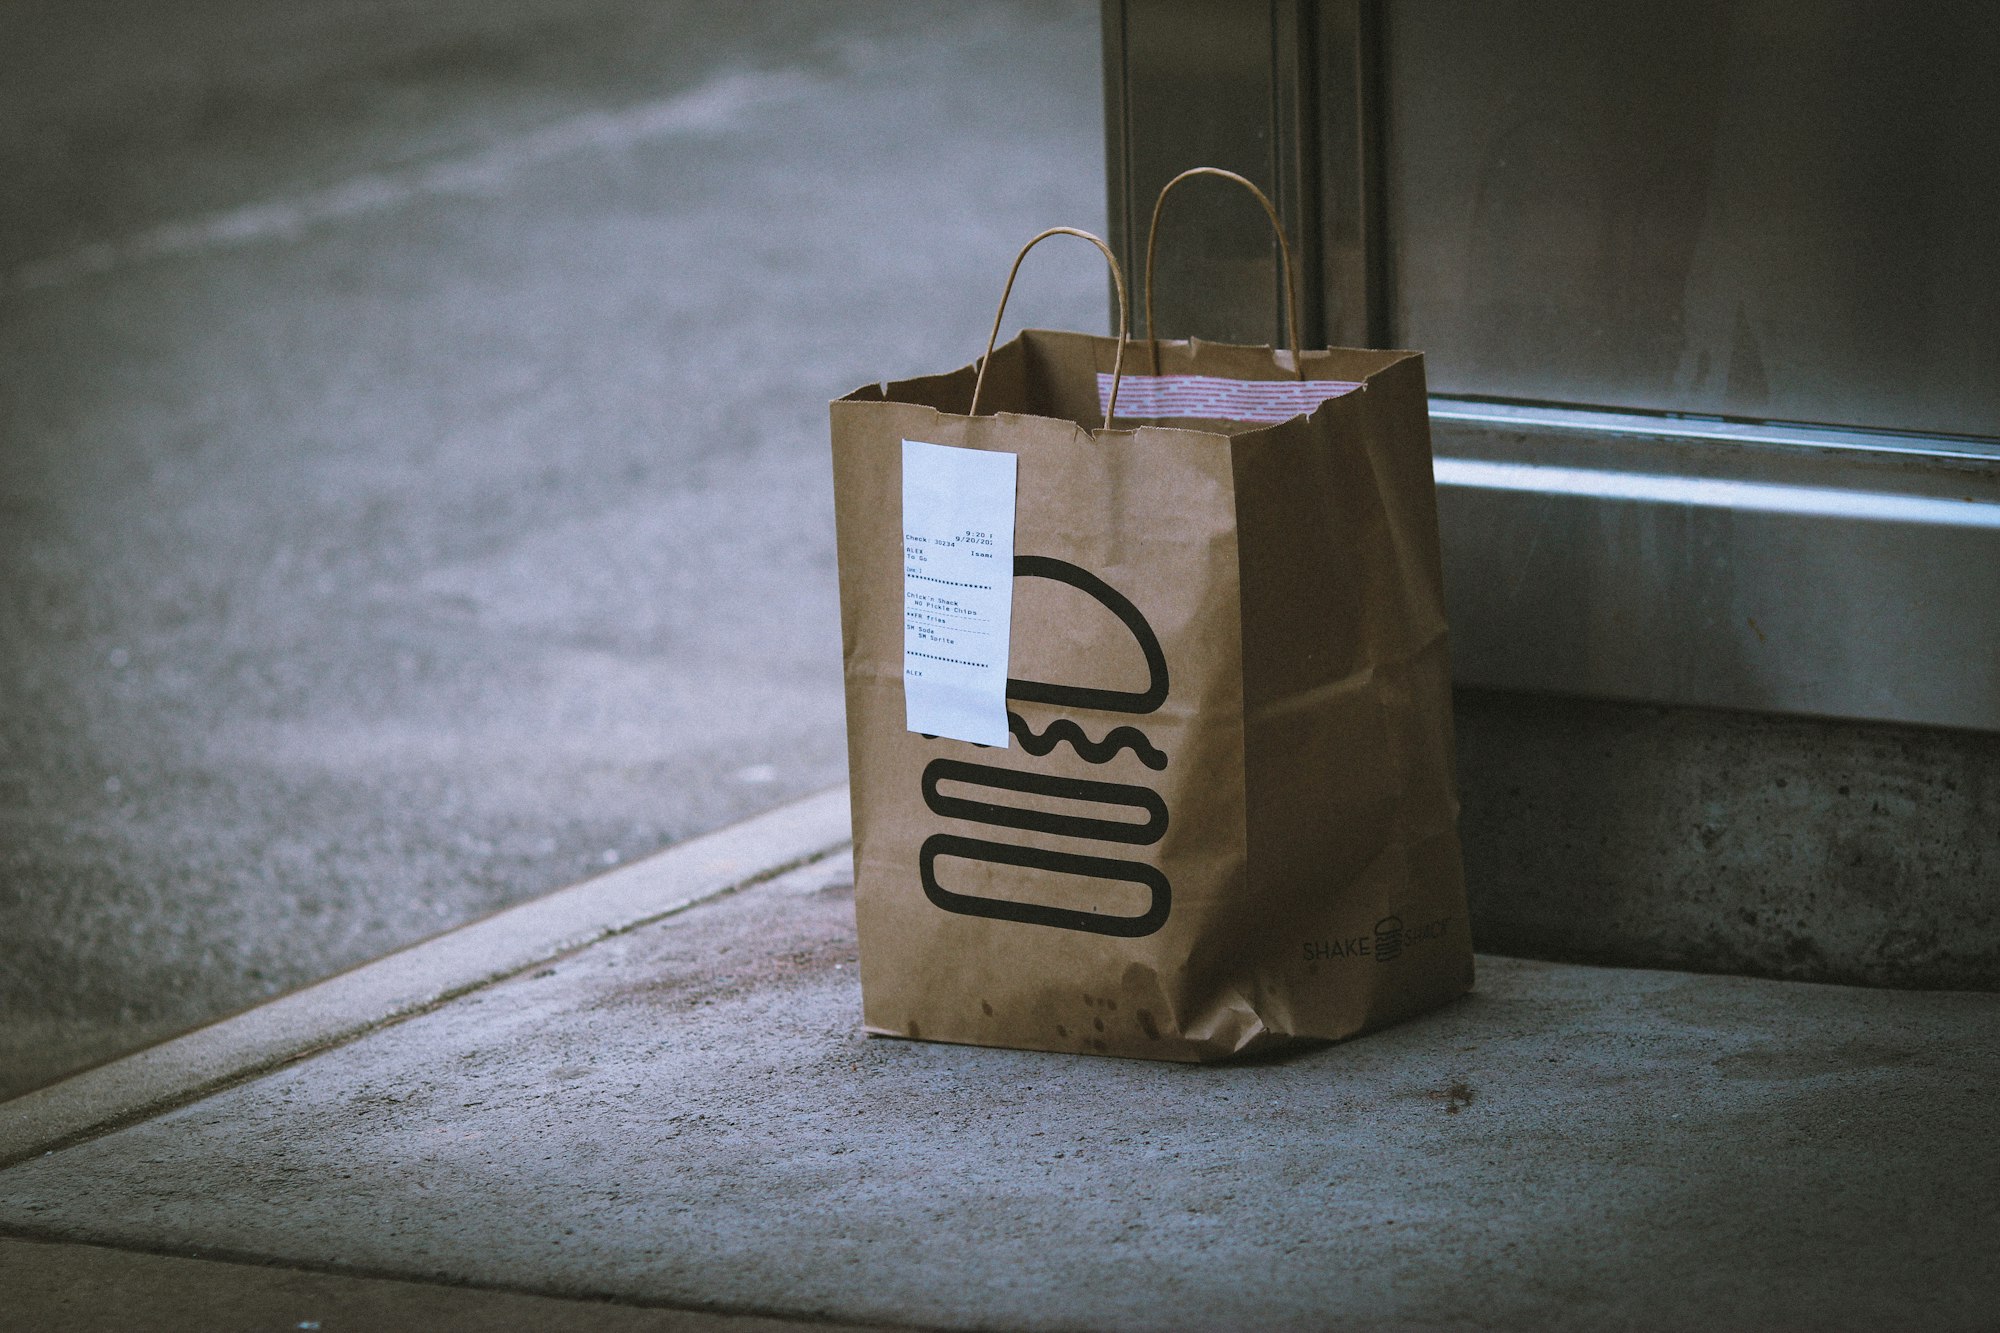 Jumia is shuttering its food delivery service in some African countries